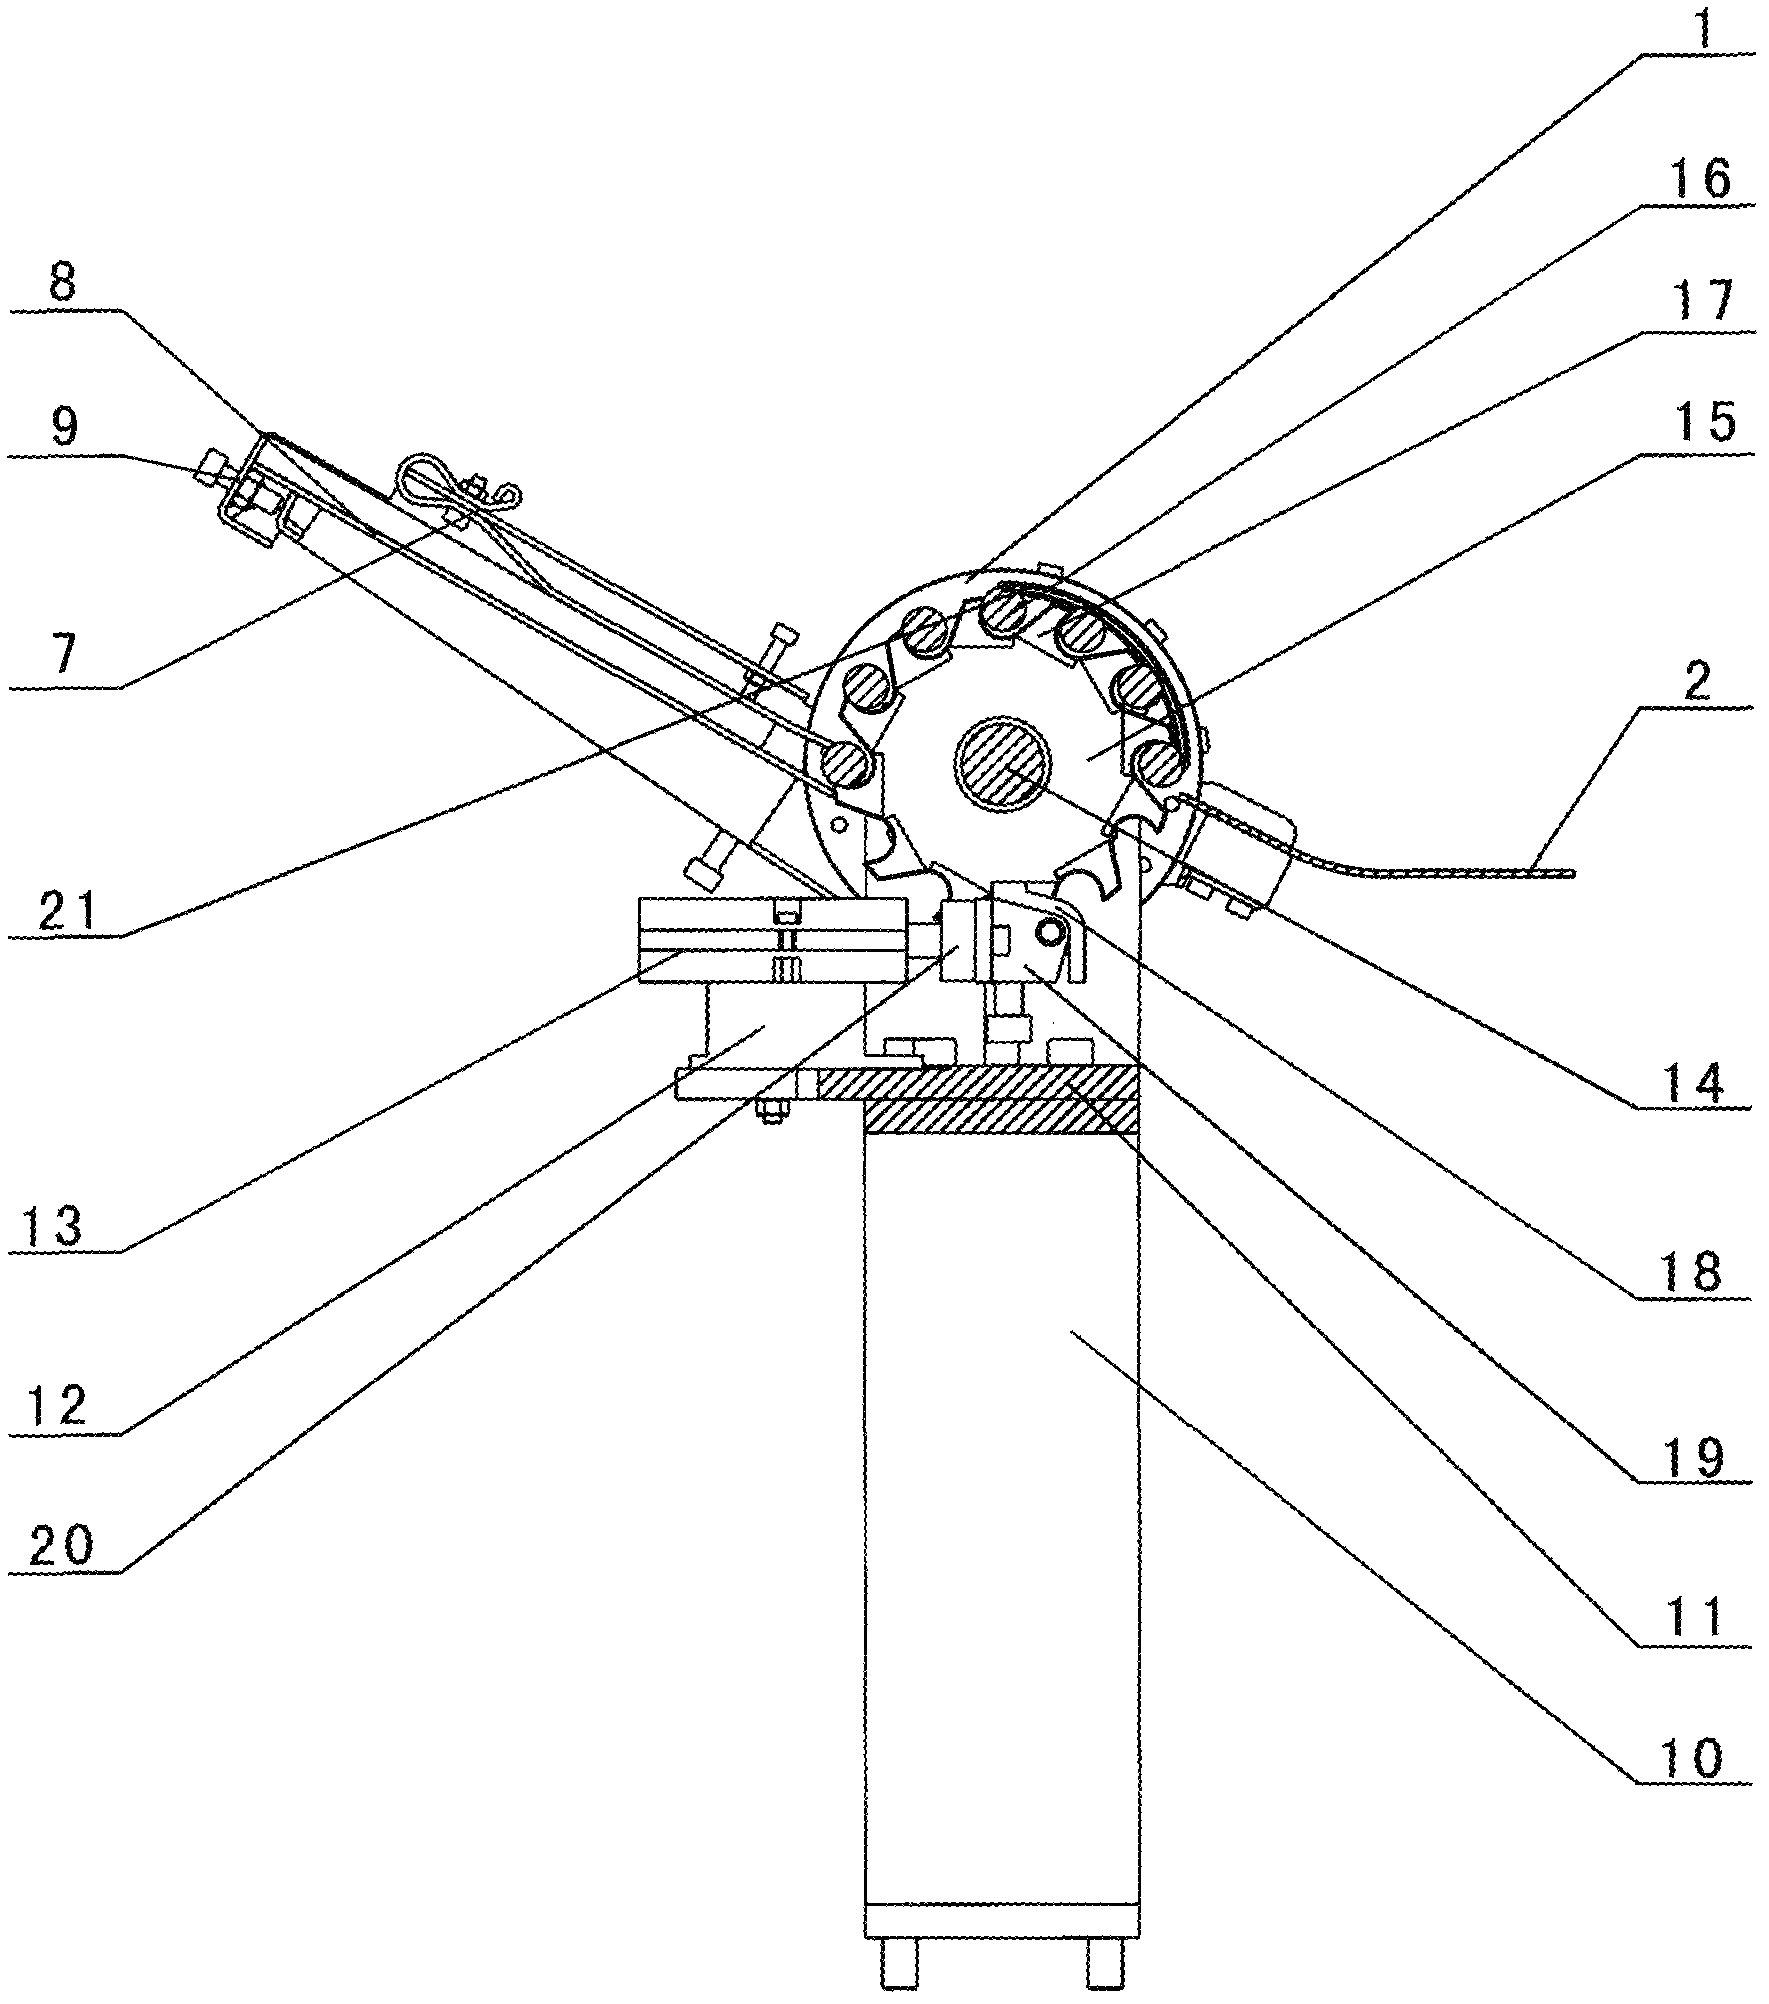 Automatic feeding device during crystal material processing